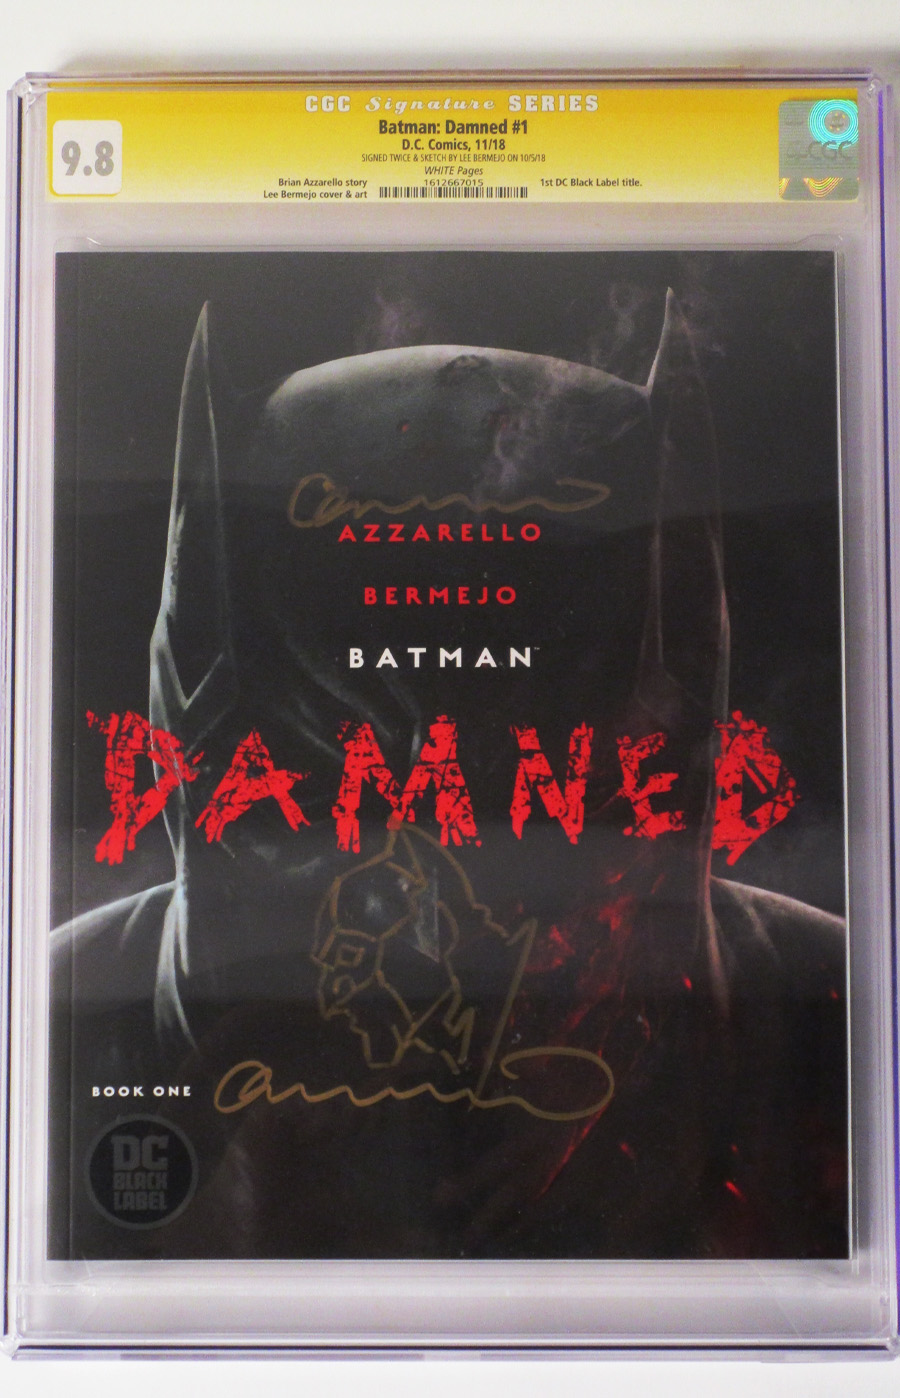 Batman Damned #1 Cover I Variant Jim Lee Cover Signed & Sketched By Lee  Bermejo CGC  - Midtown Comics